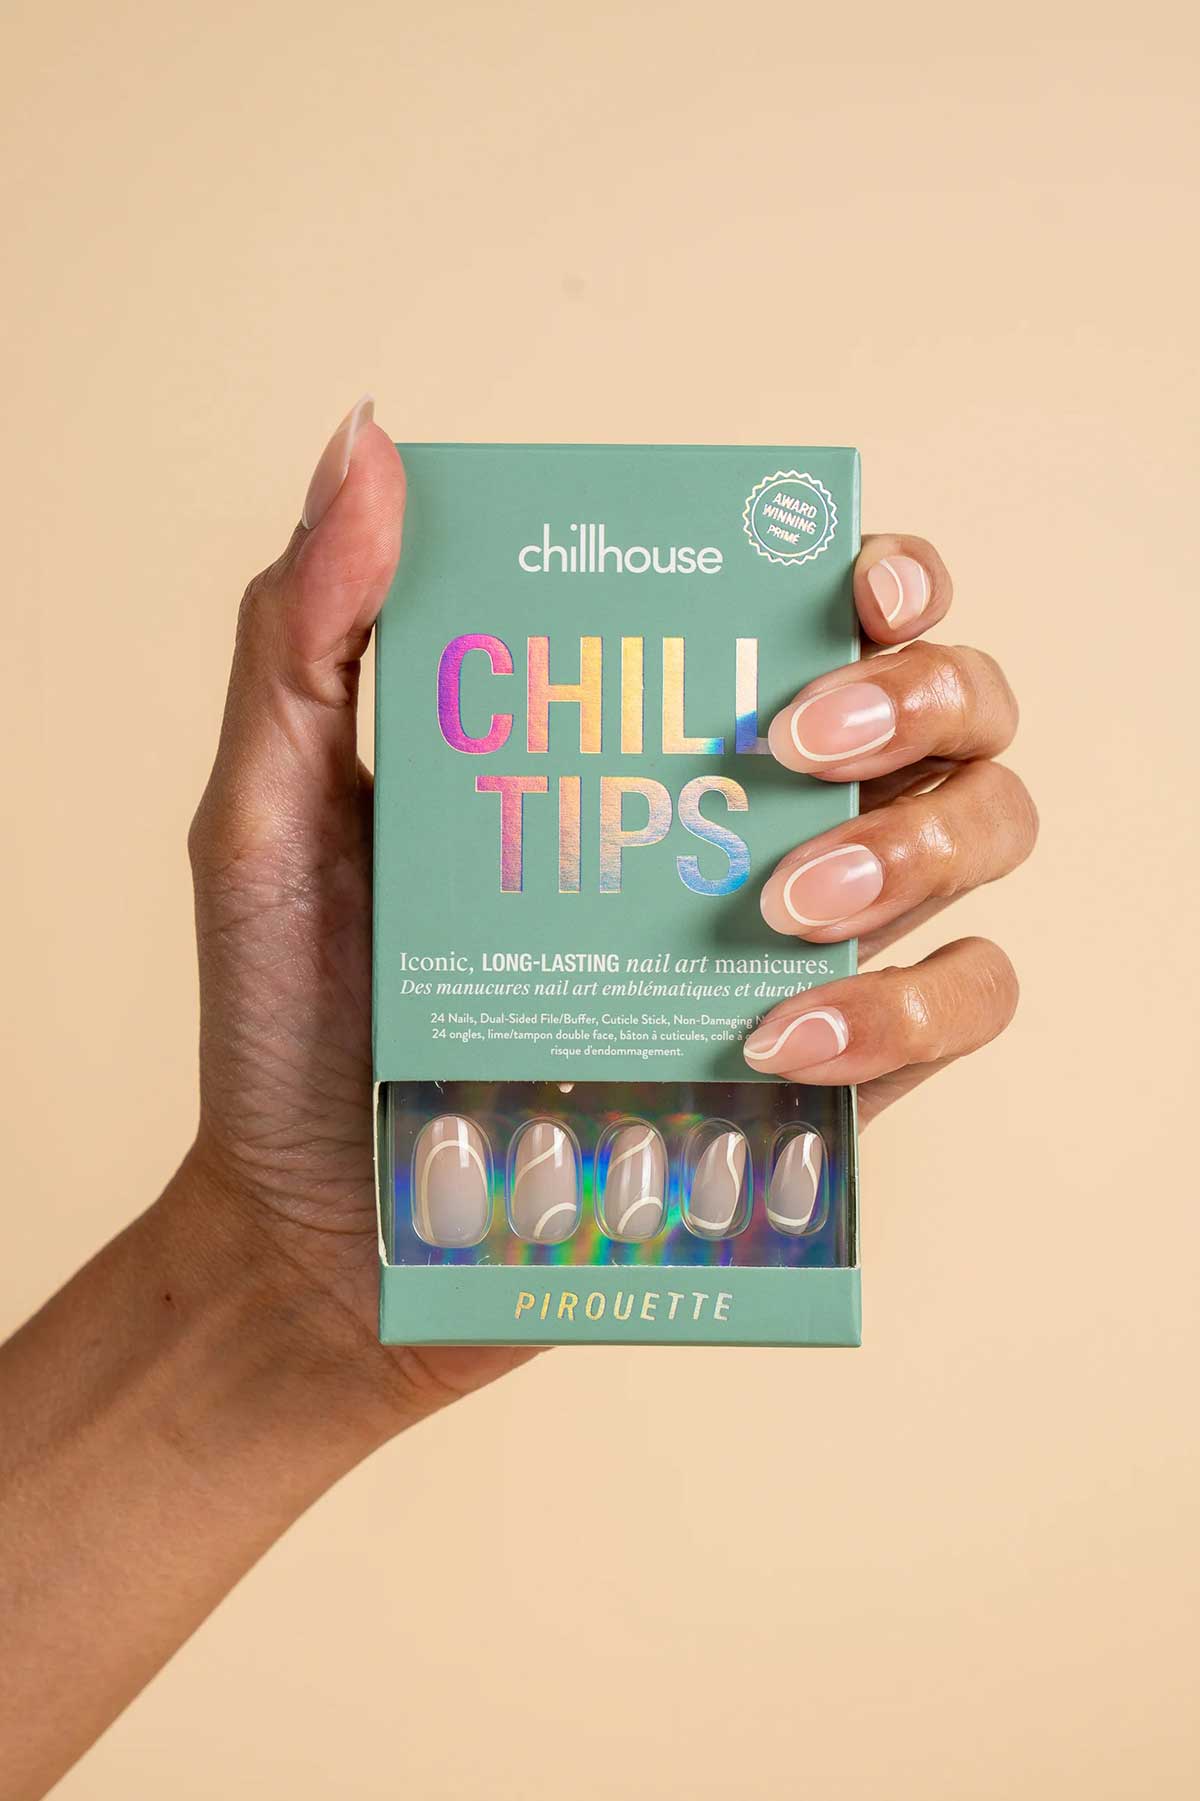 Chillhouse - Chill Tips - Pirouette